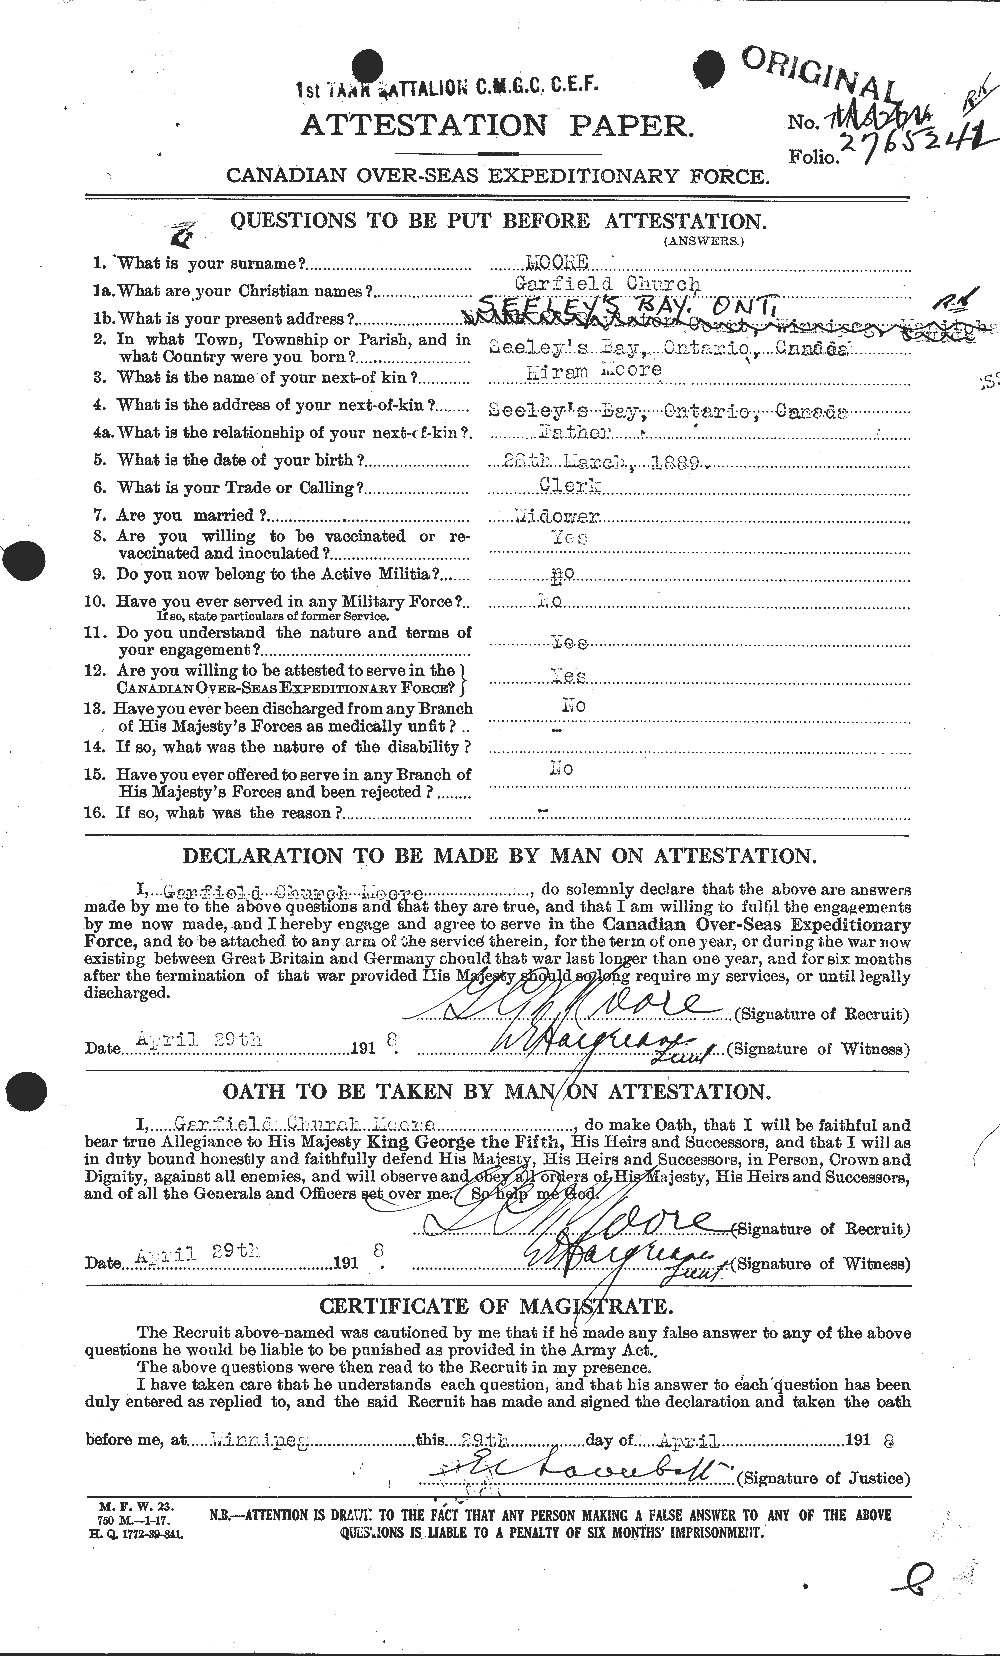 Personnel Records of the First World War - CEF 506766a